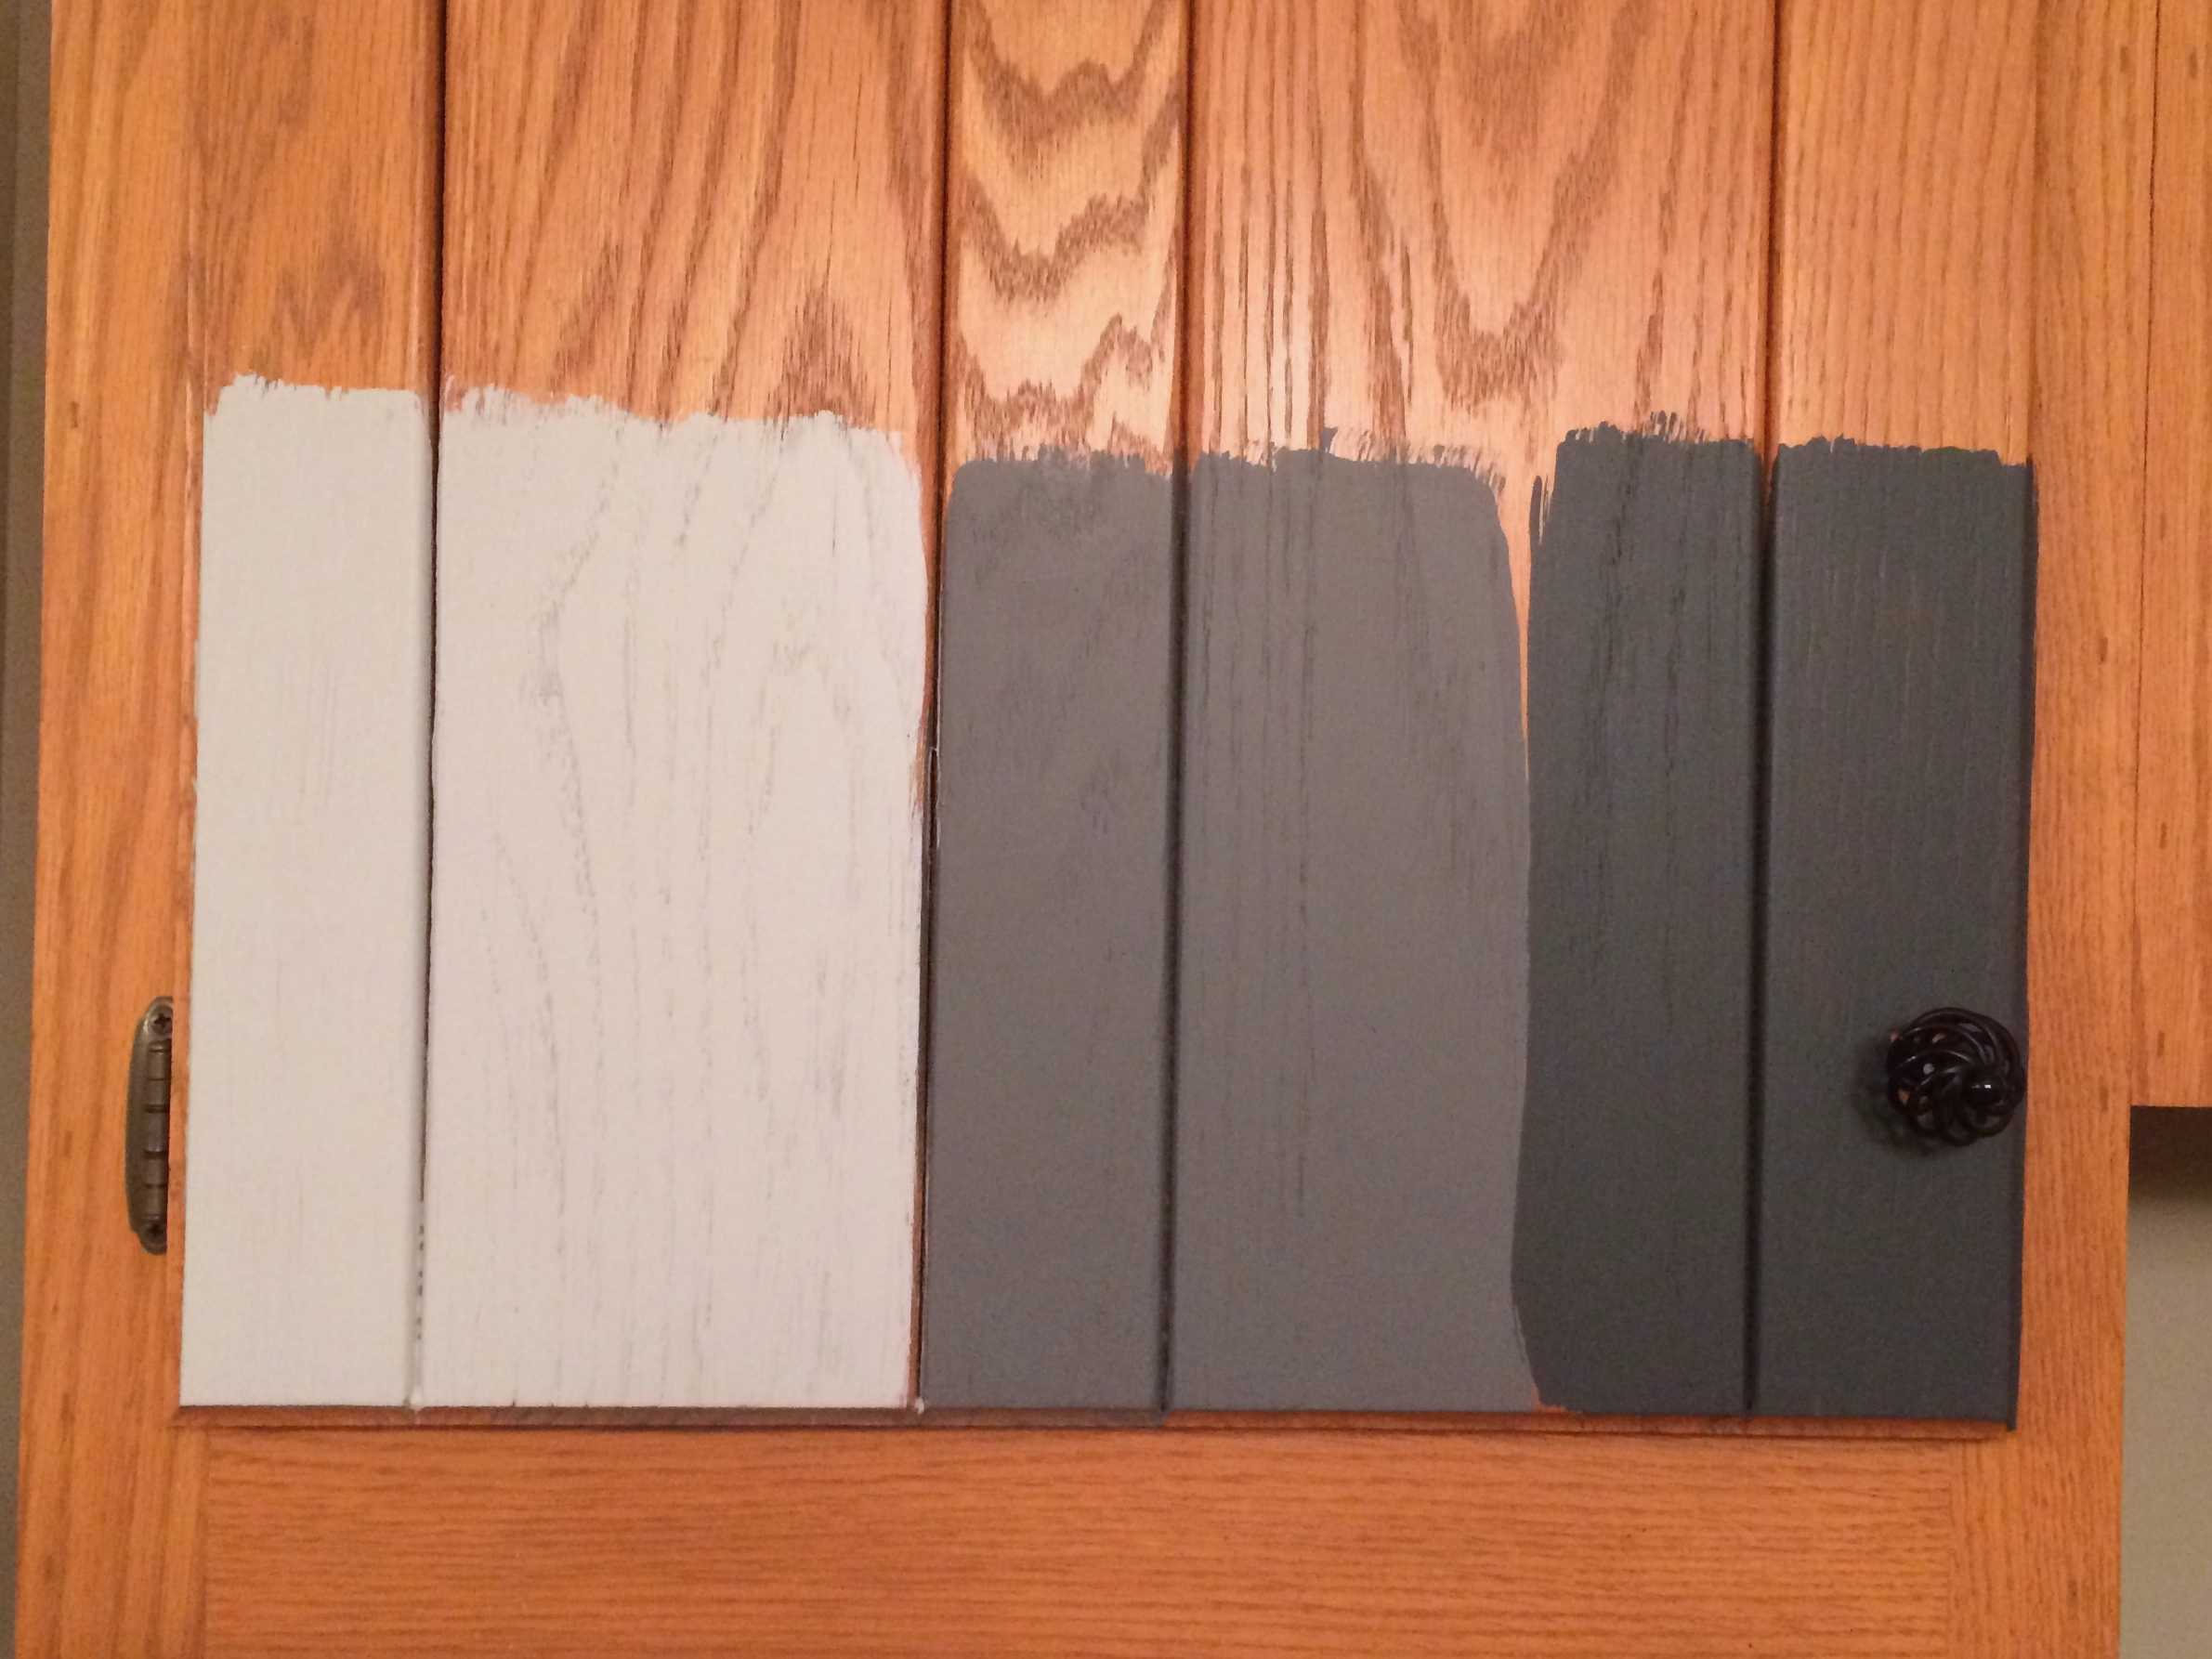 How to Paint Kitchen Cabinets Without Sanding or Priming (and get LONG-LASTING results)!